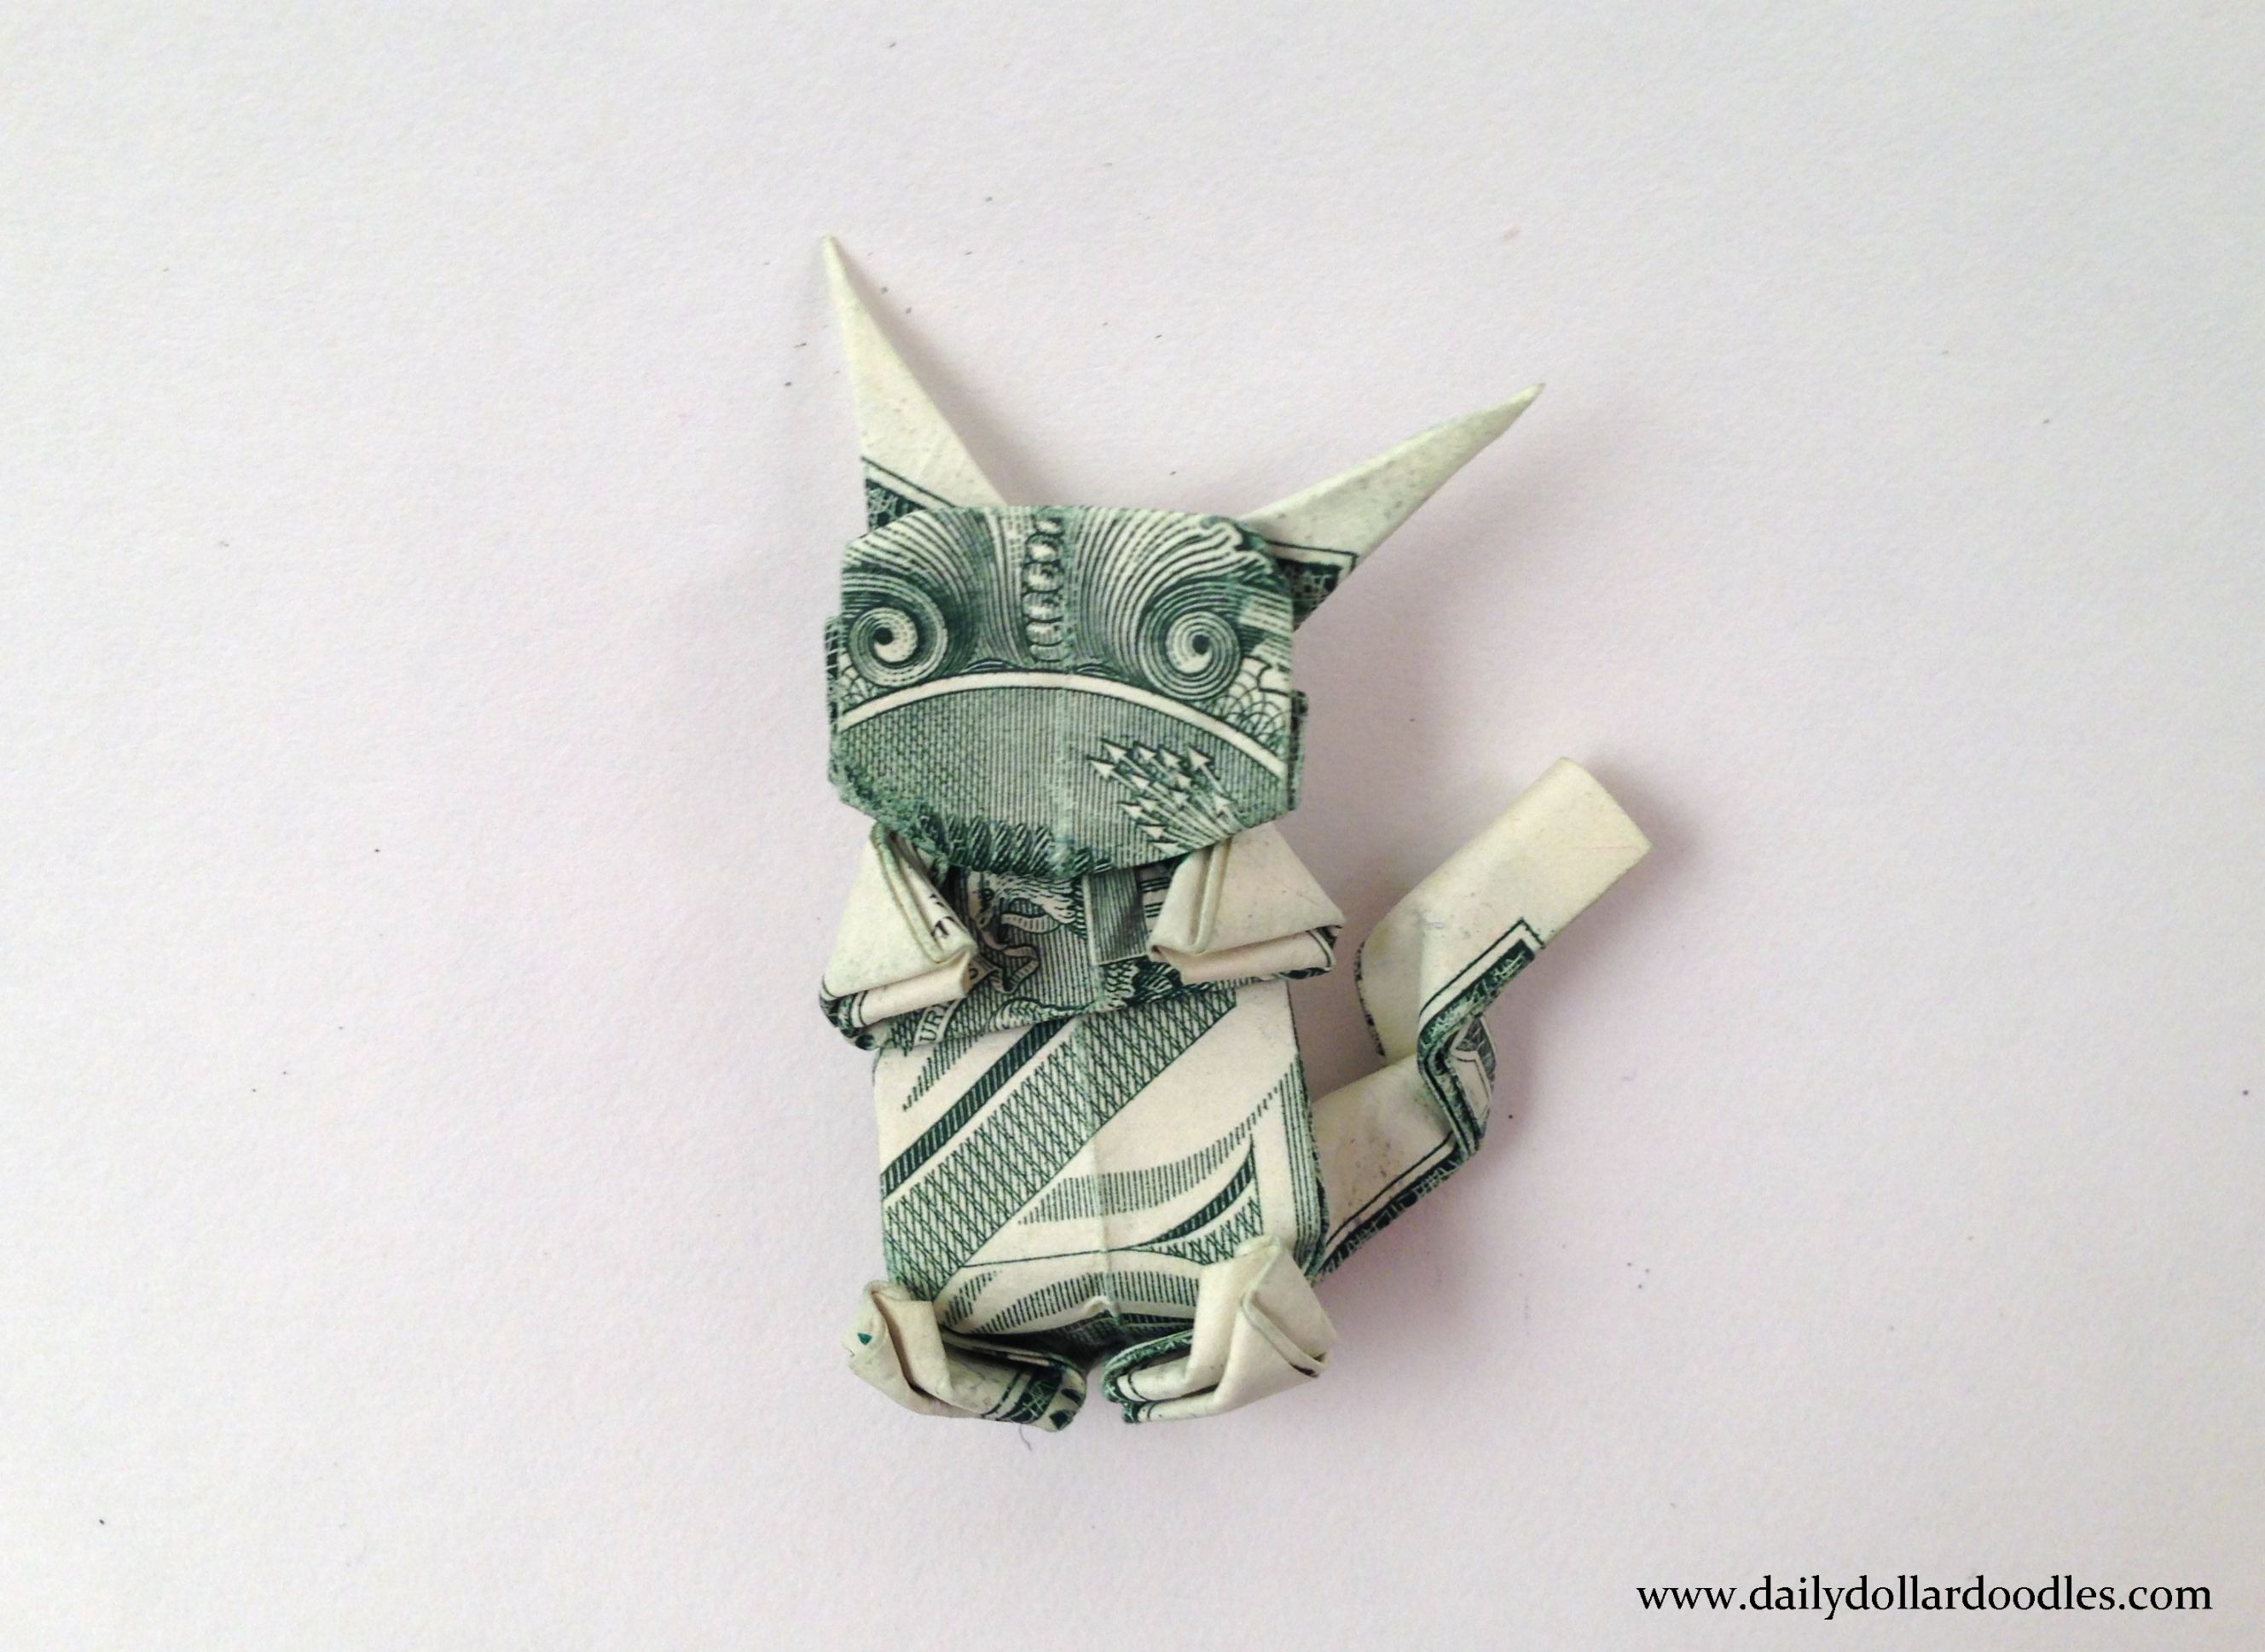 Origami Dollar Bill Found This Pikachu Dollar Bill Origami And Thought It Was Neat It